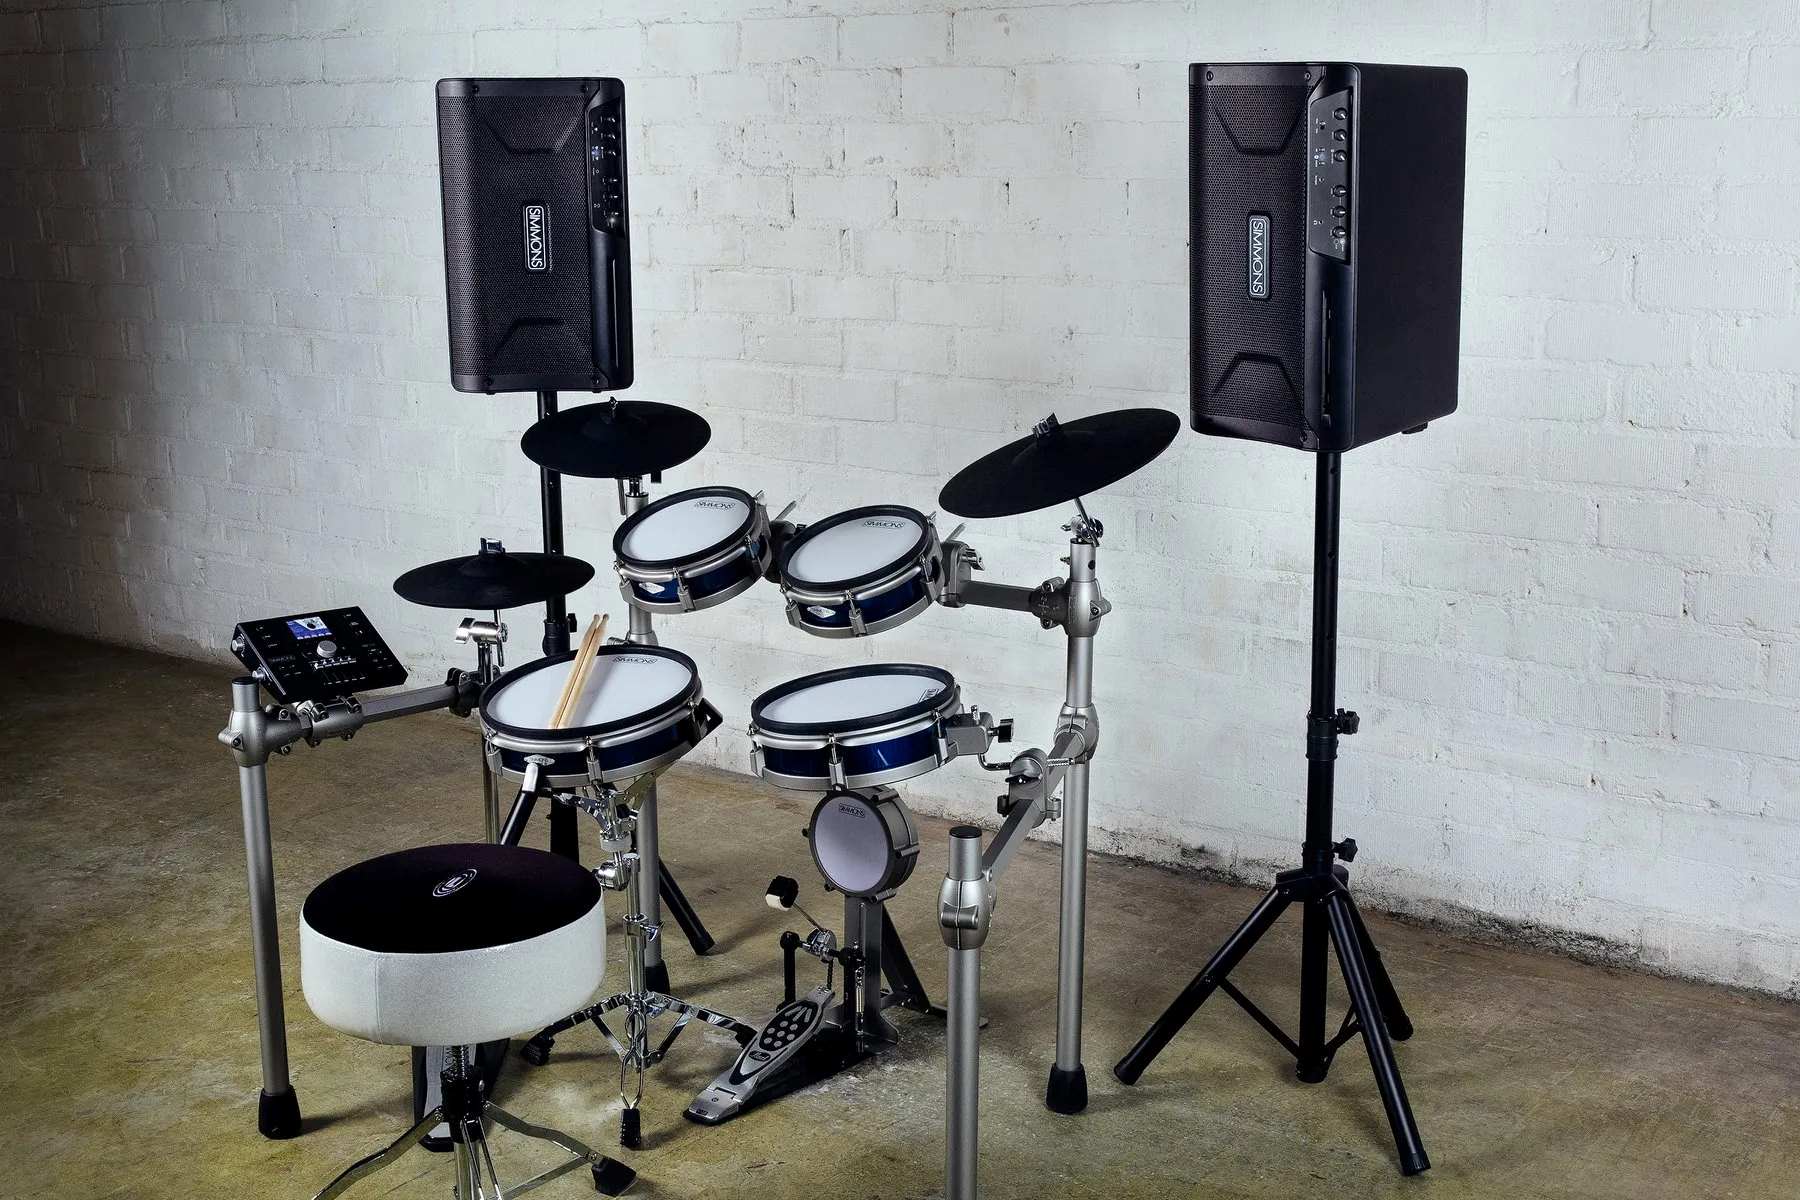 How To Make Electronic Drums Sound Better